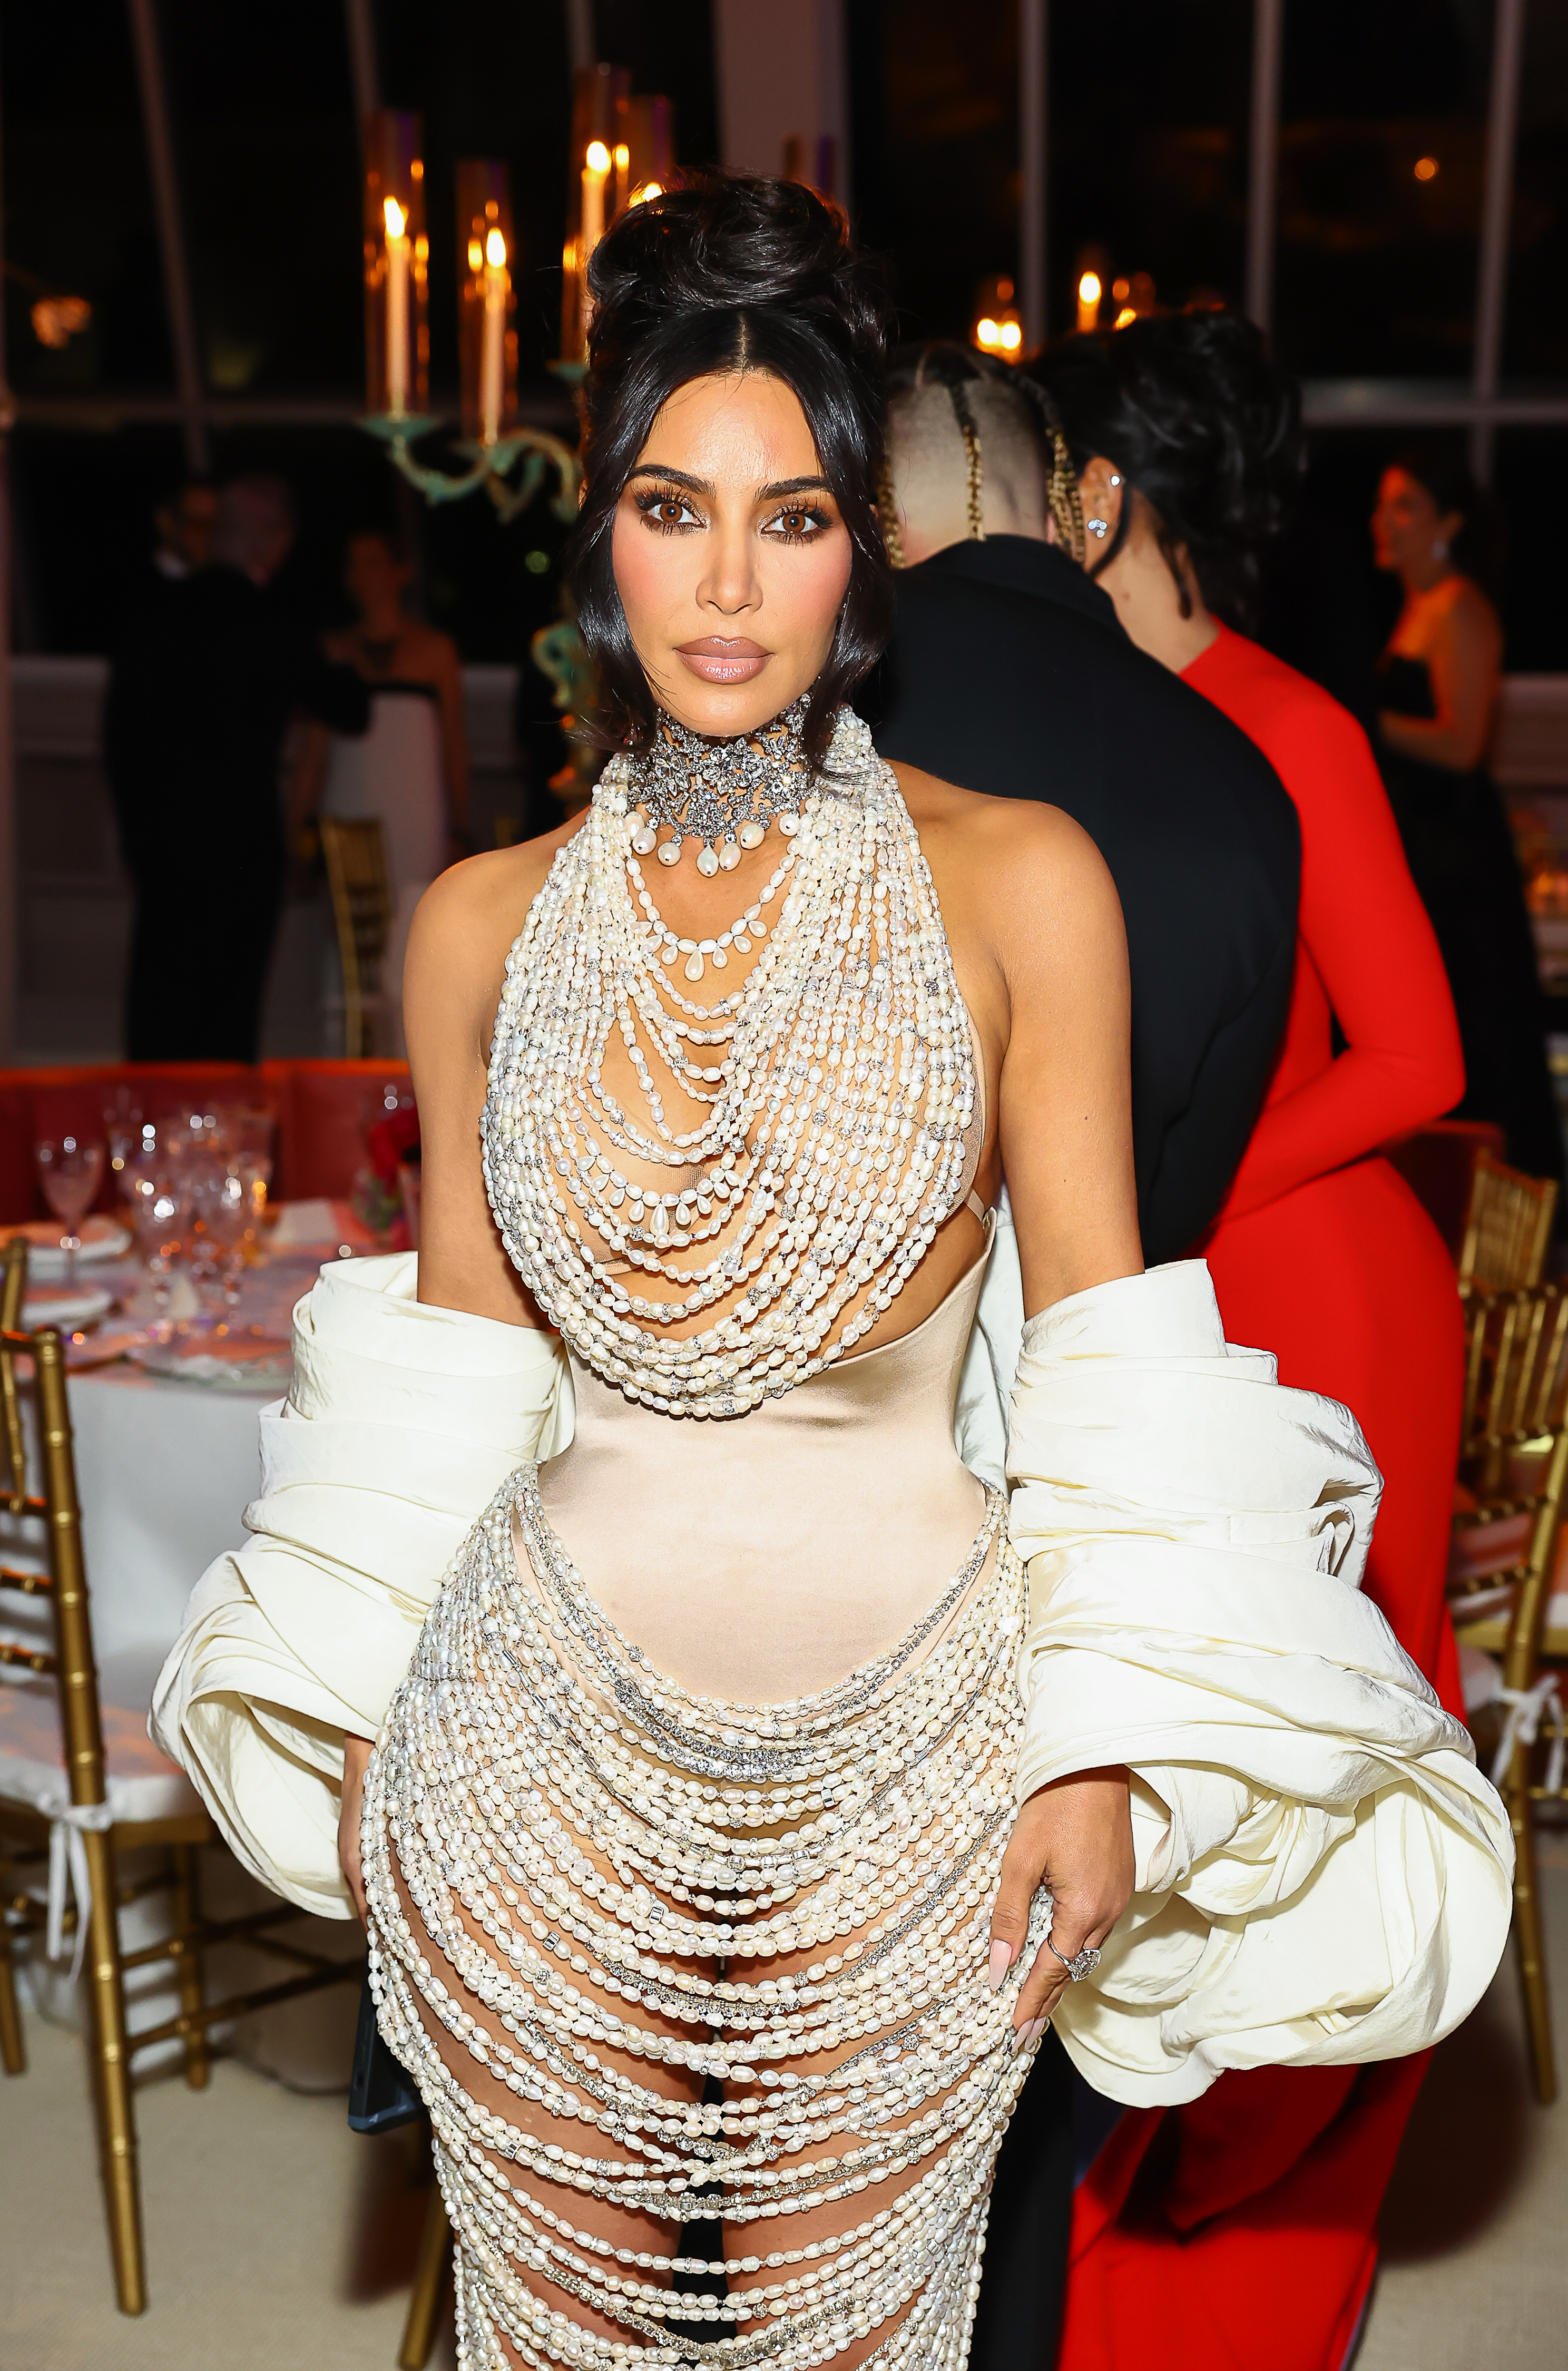 Met Gala 2023's most talked-about moments raised eyebrows